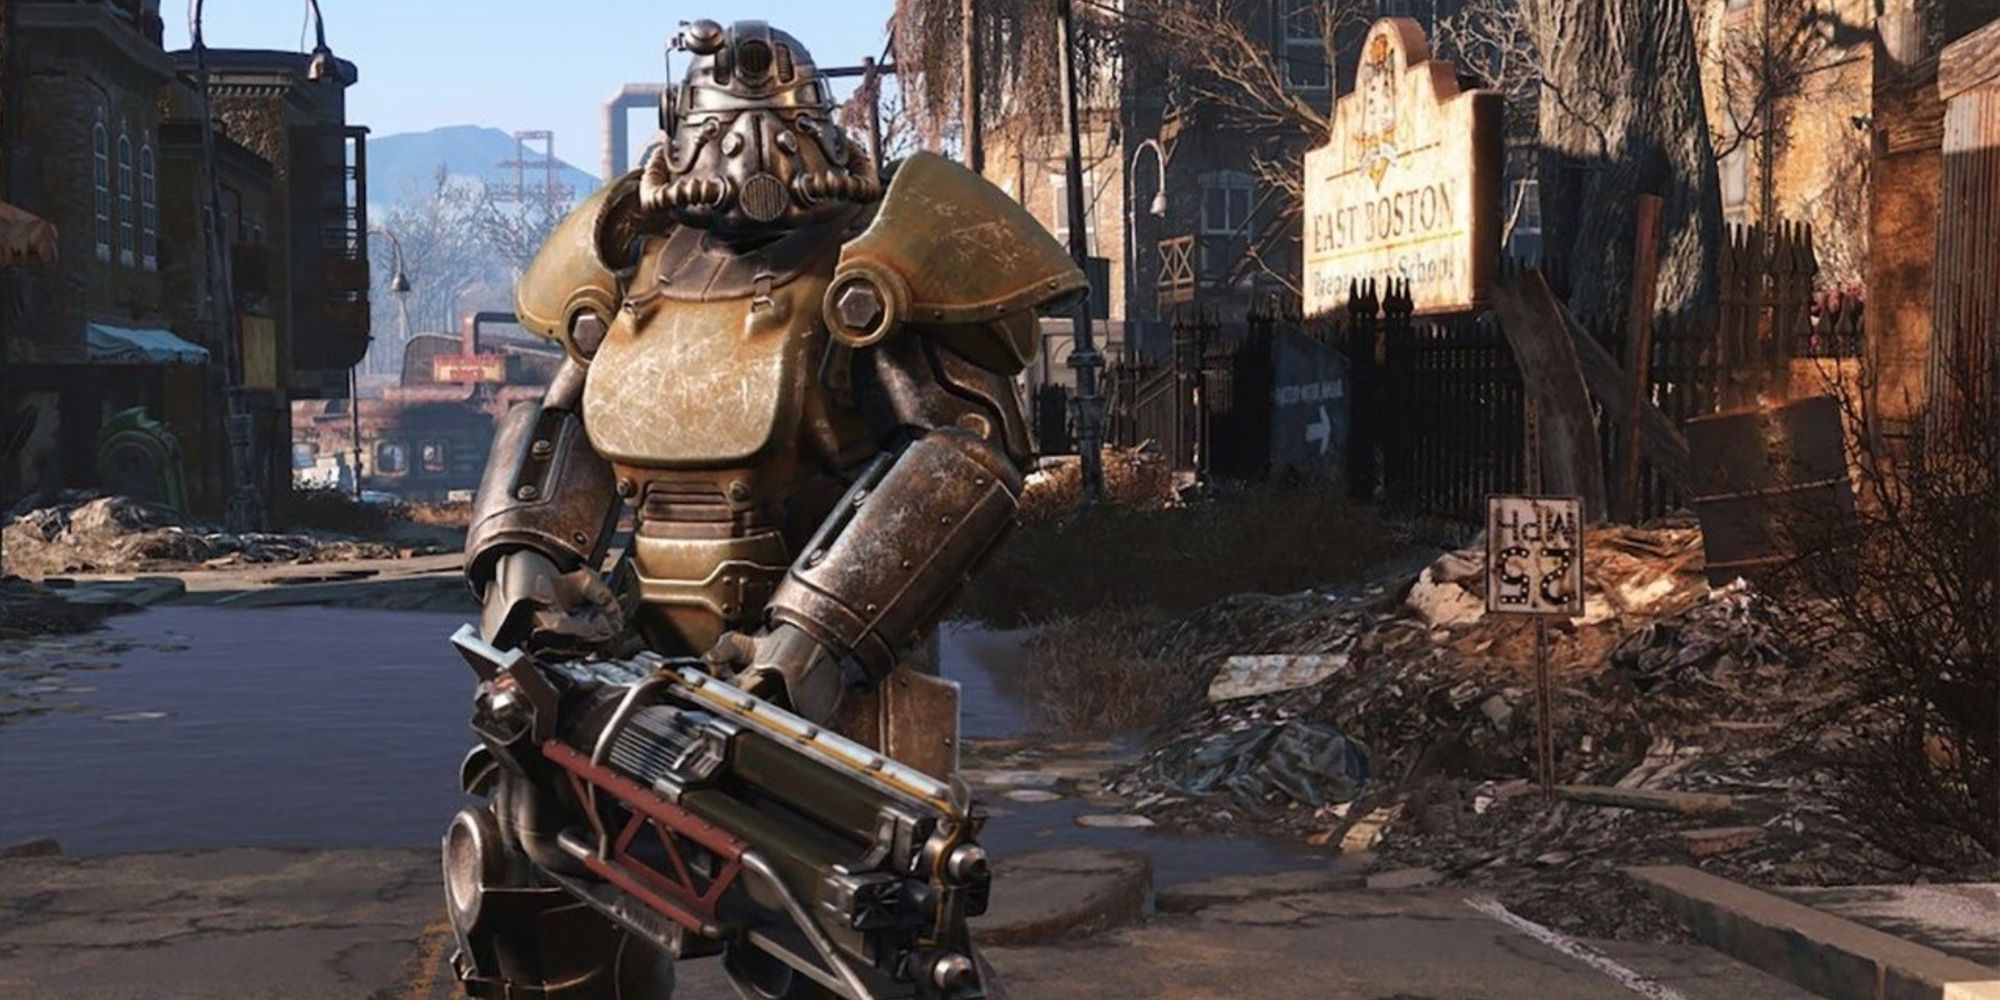 A heavily armed player manning a gun in Fallout 4